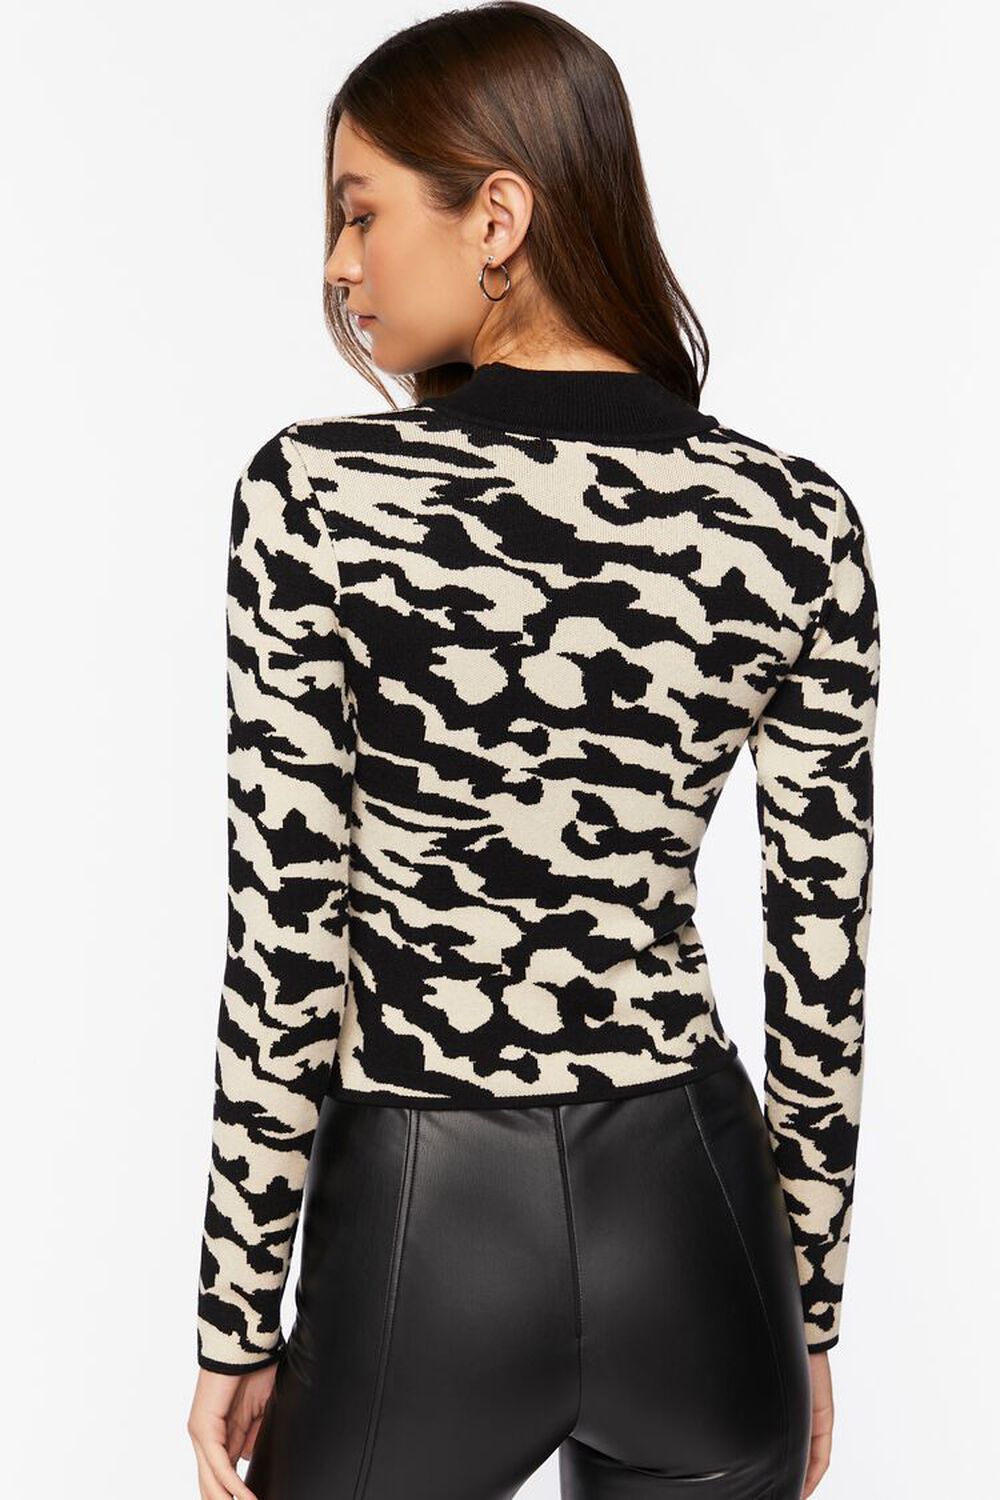 BLACK/CREAM Abstract Cutout Sweater, image 3